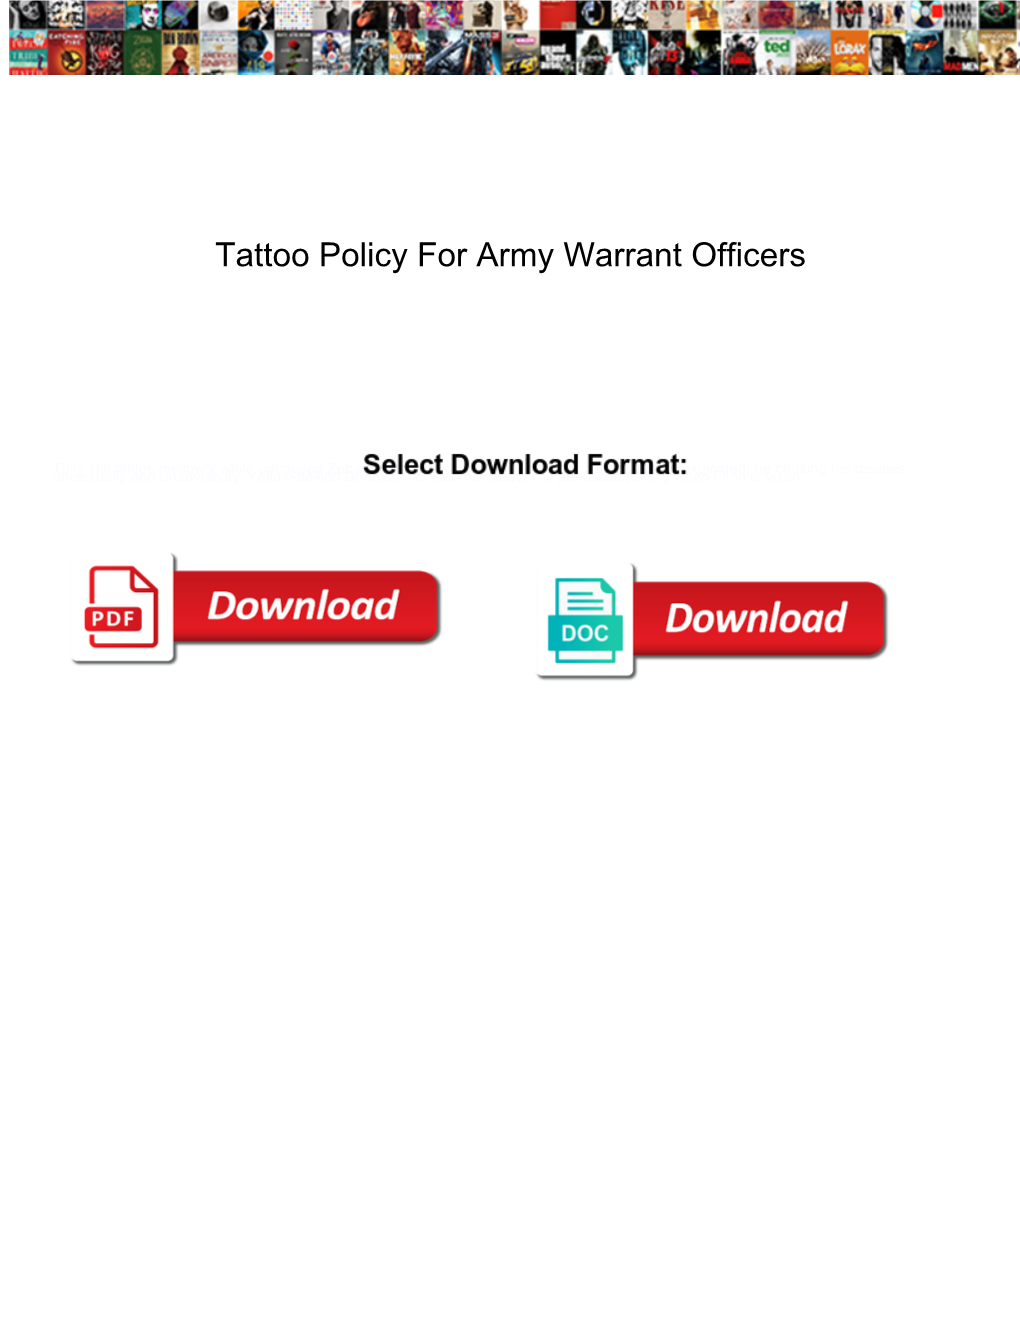 Tattoo Policy for Army Warrant Officers